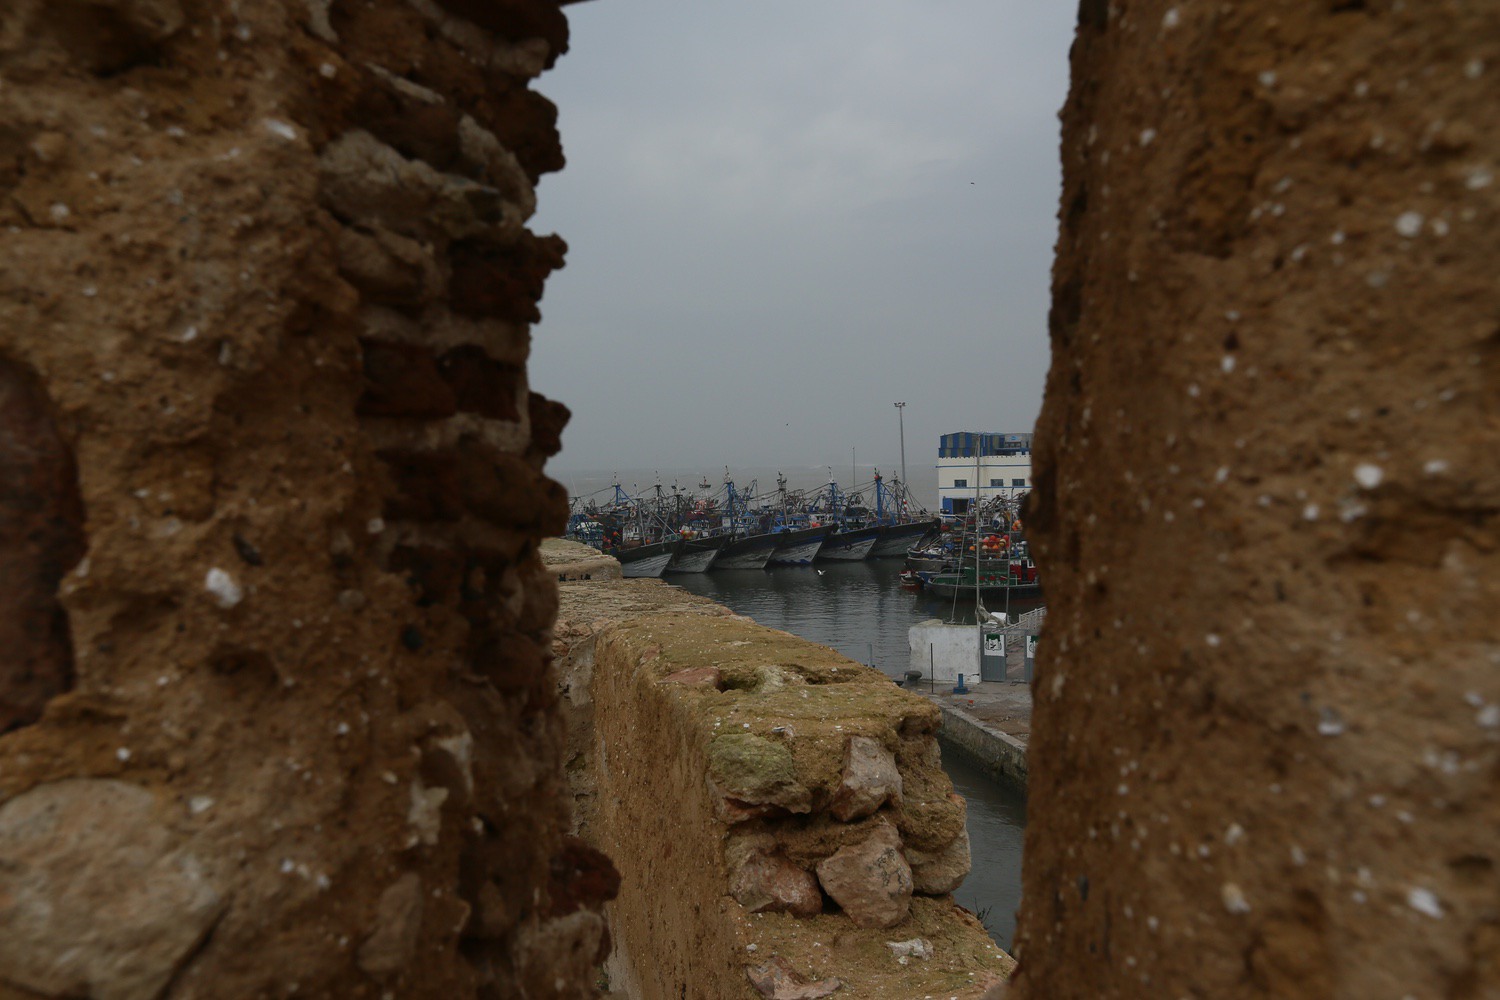 View of the fishermen's boats through the walls